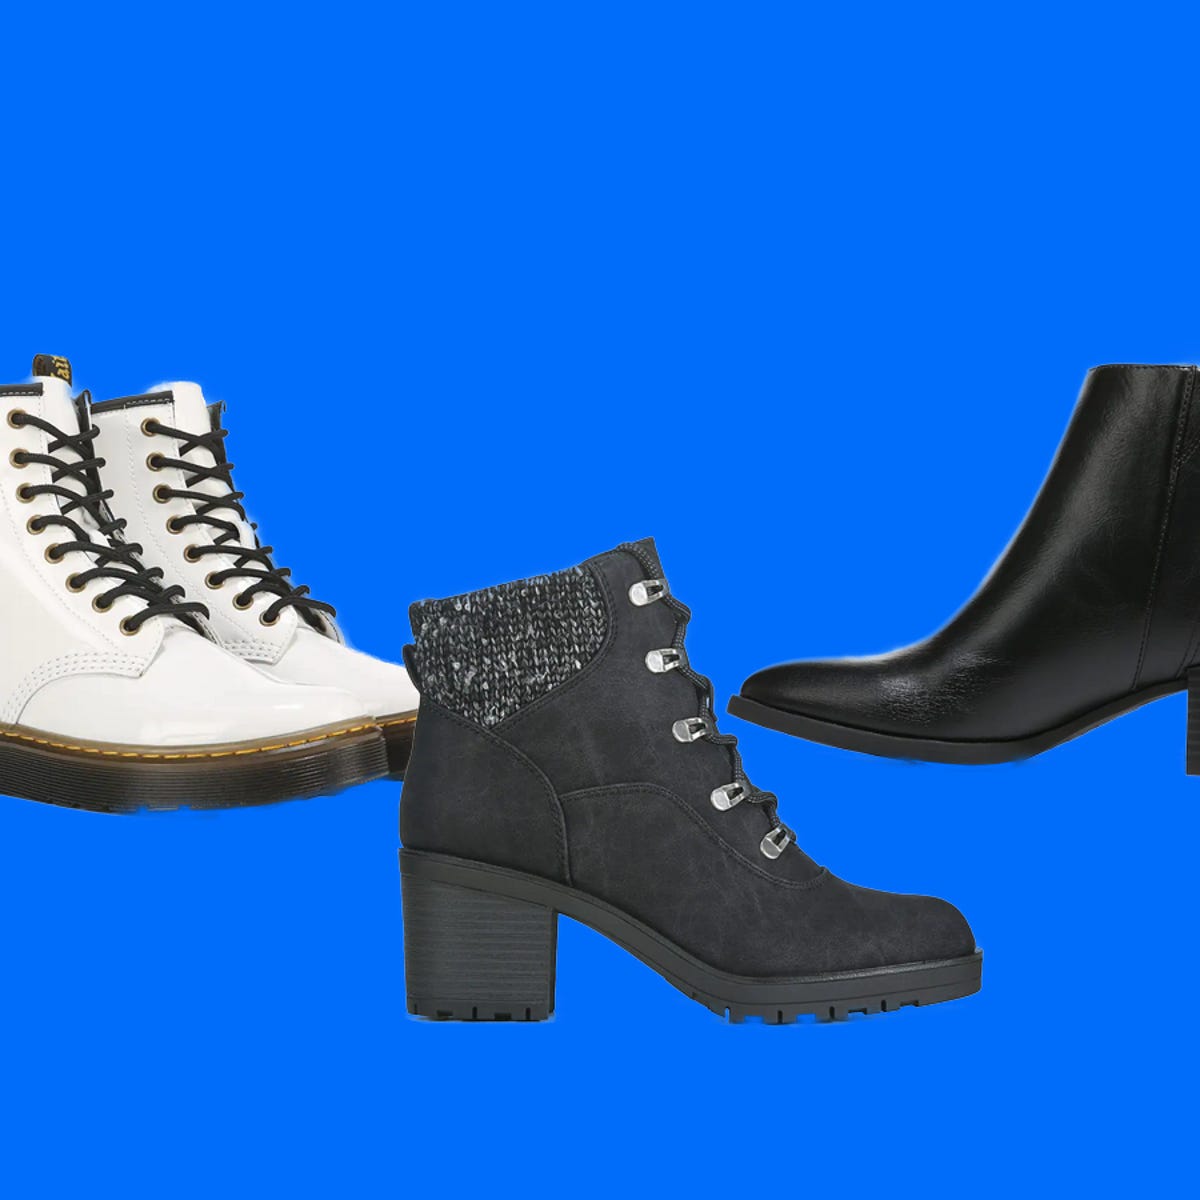 Famous Footwear Lace Up Boots Flash Sales | medialit.org